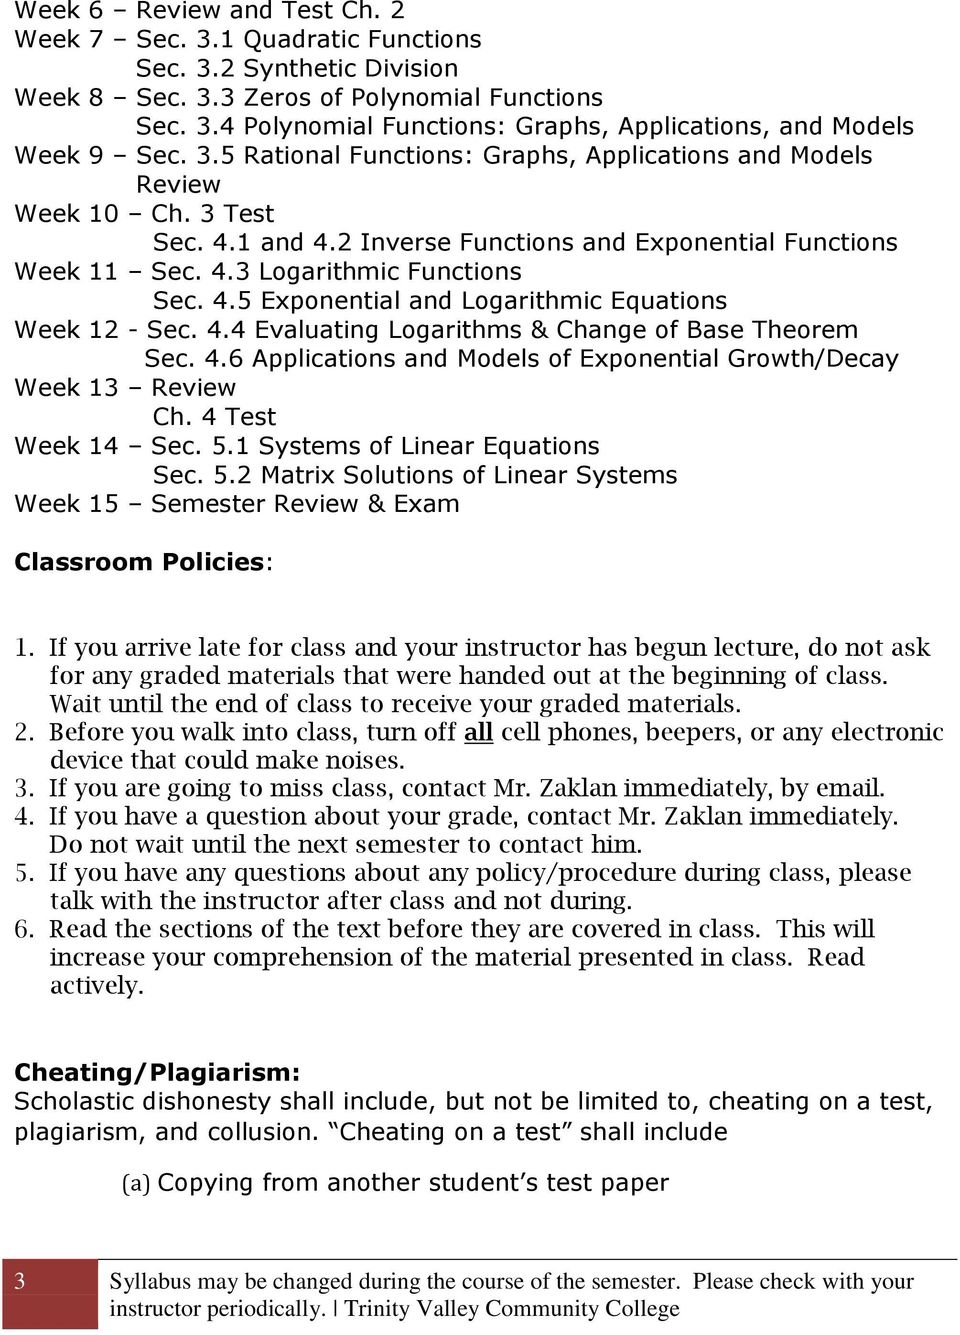 4.4 Evaluating Logarithms & Change of Base Theorem Sec. 4.6 Applications and Models of Exponential Growth/Decay Week 13 Review Ch. 4 Test Week 14 Sec. 5.